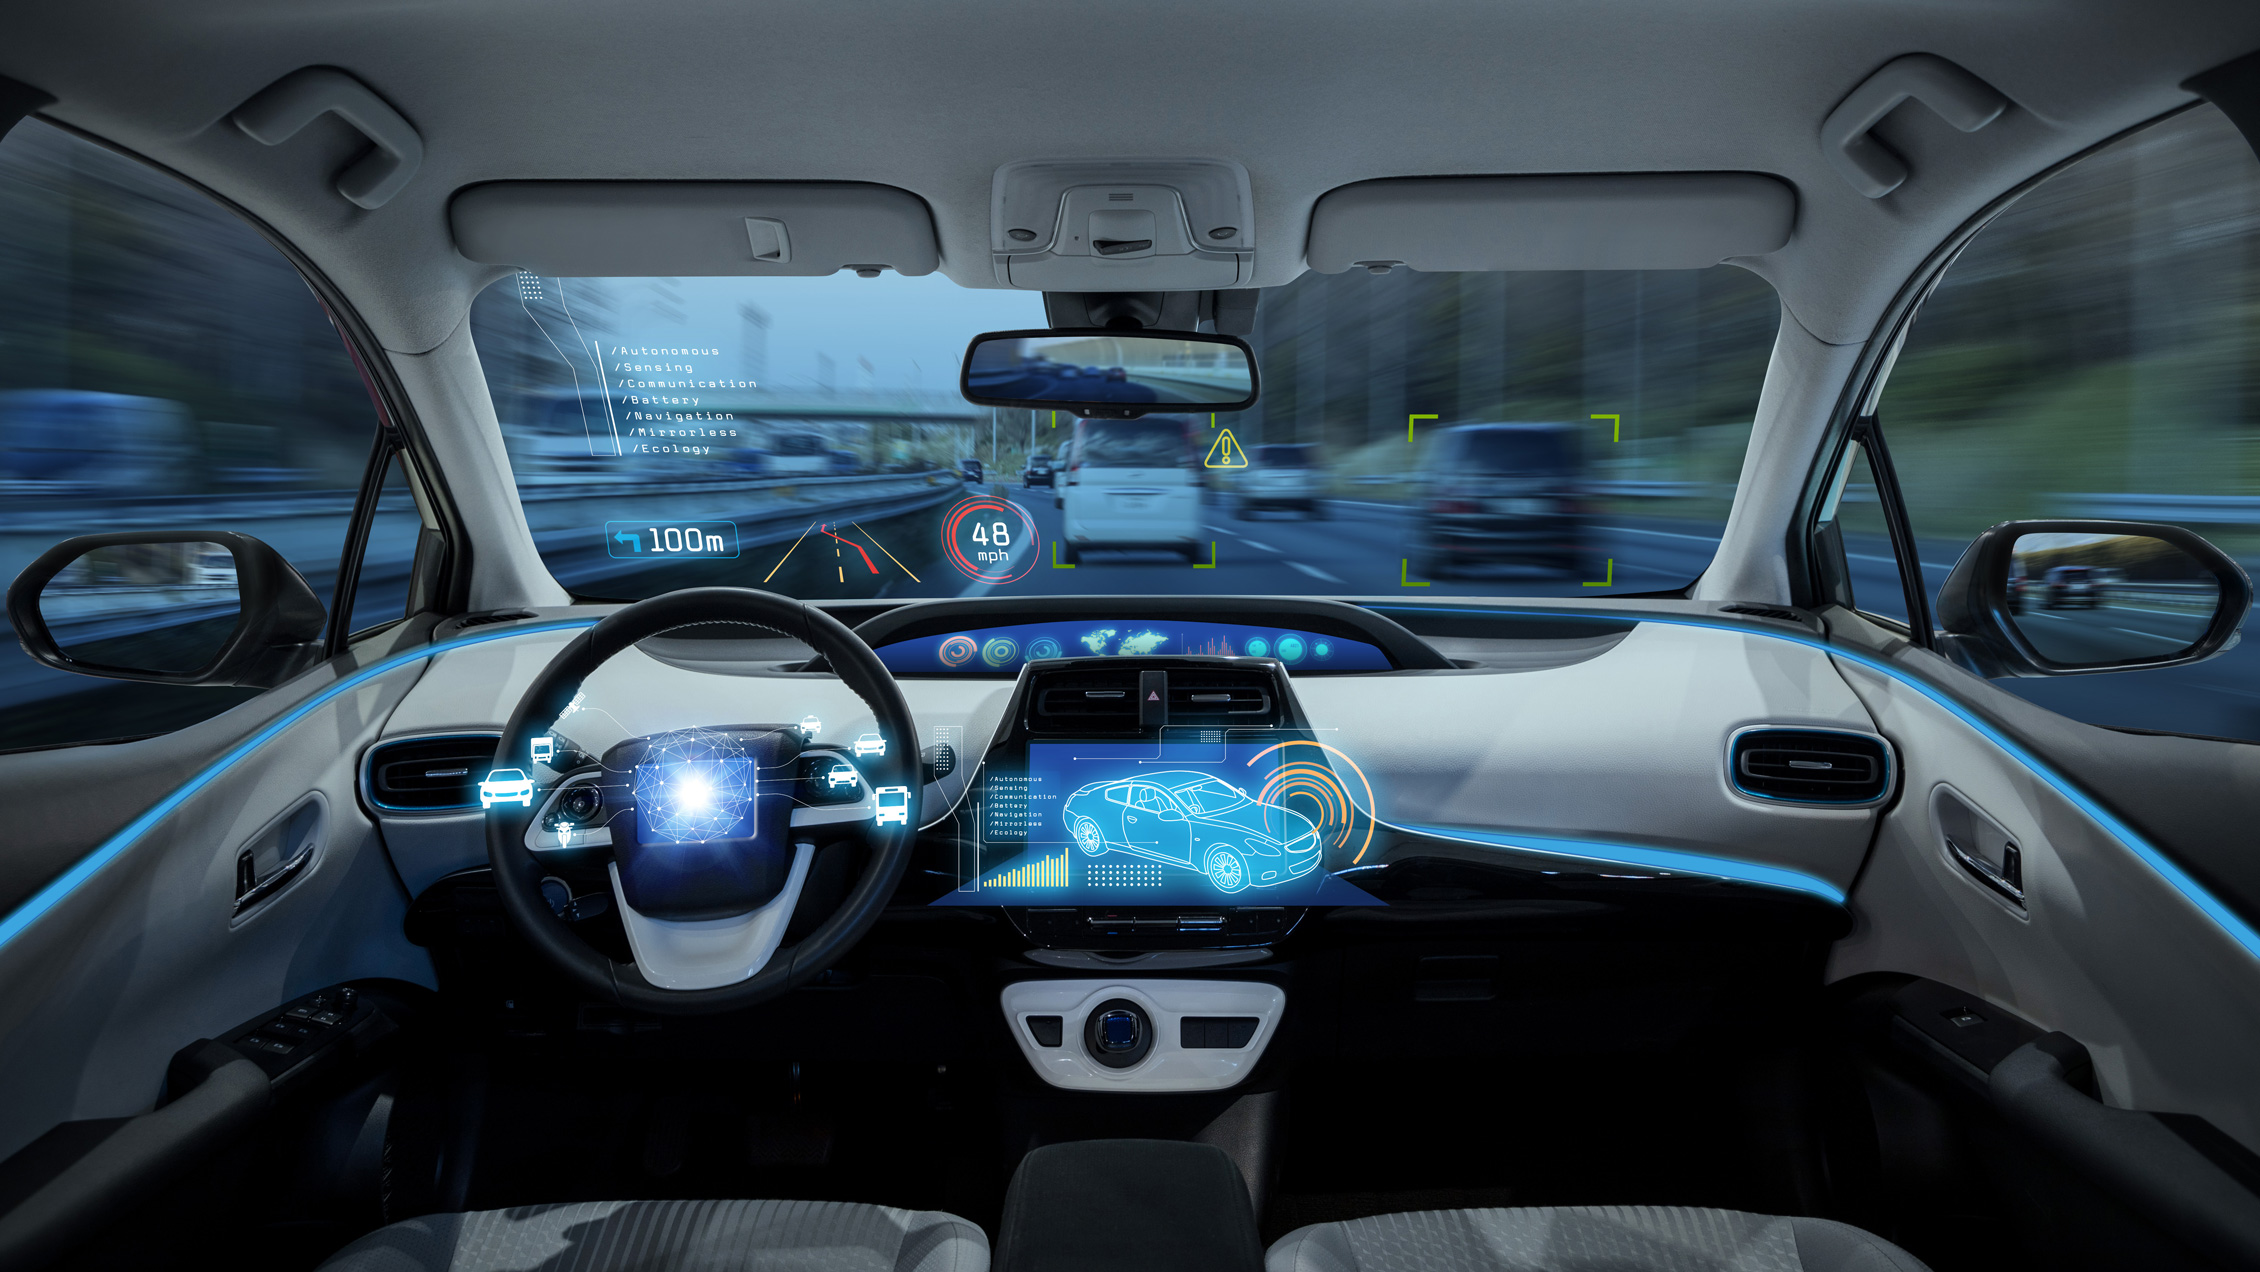 The interior of a self-driving car